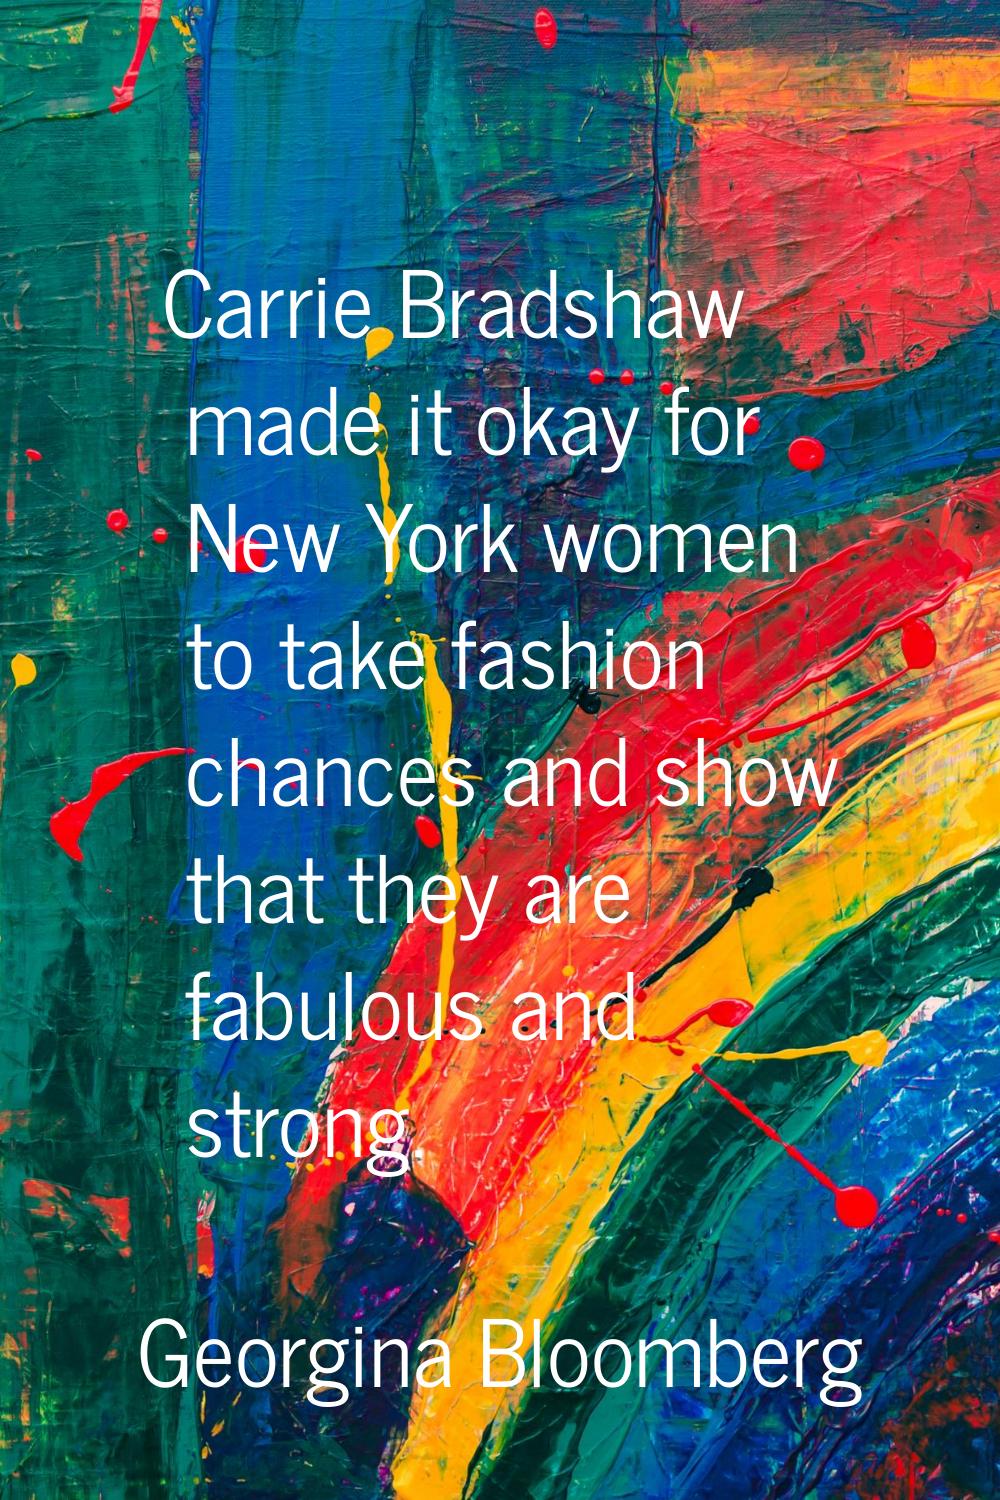 Carrie Bradshaw made it okay for New York women to take fashion chances and show that they are fabu